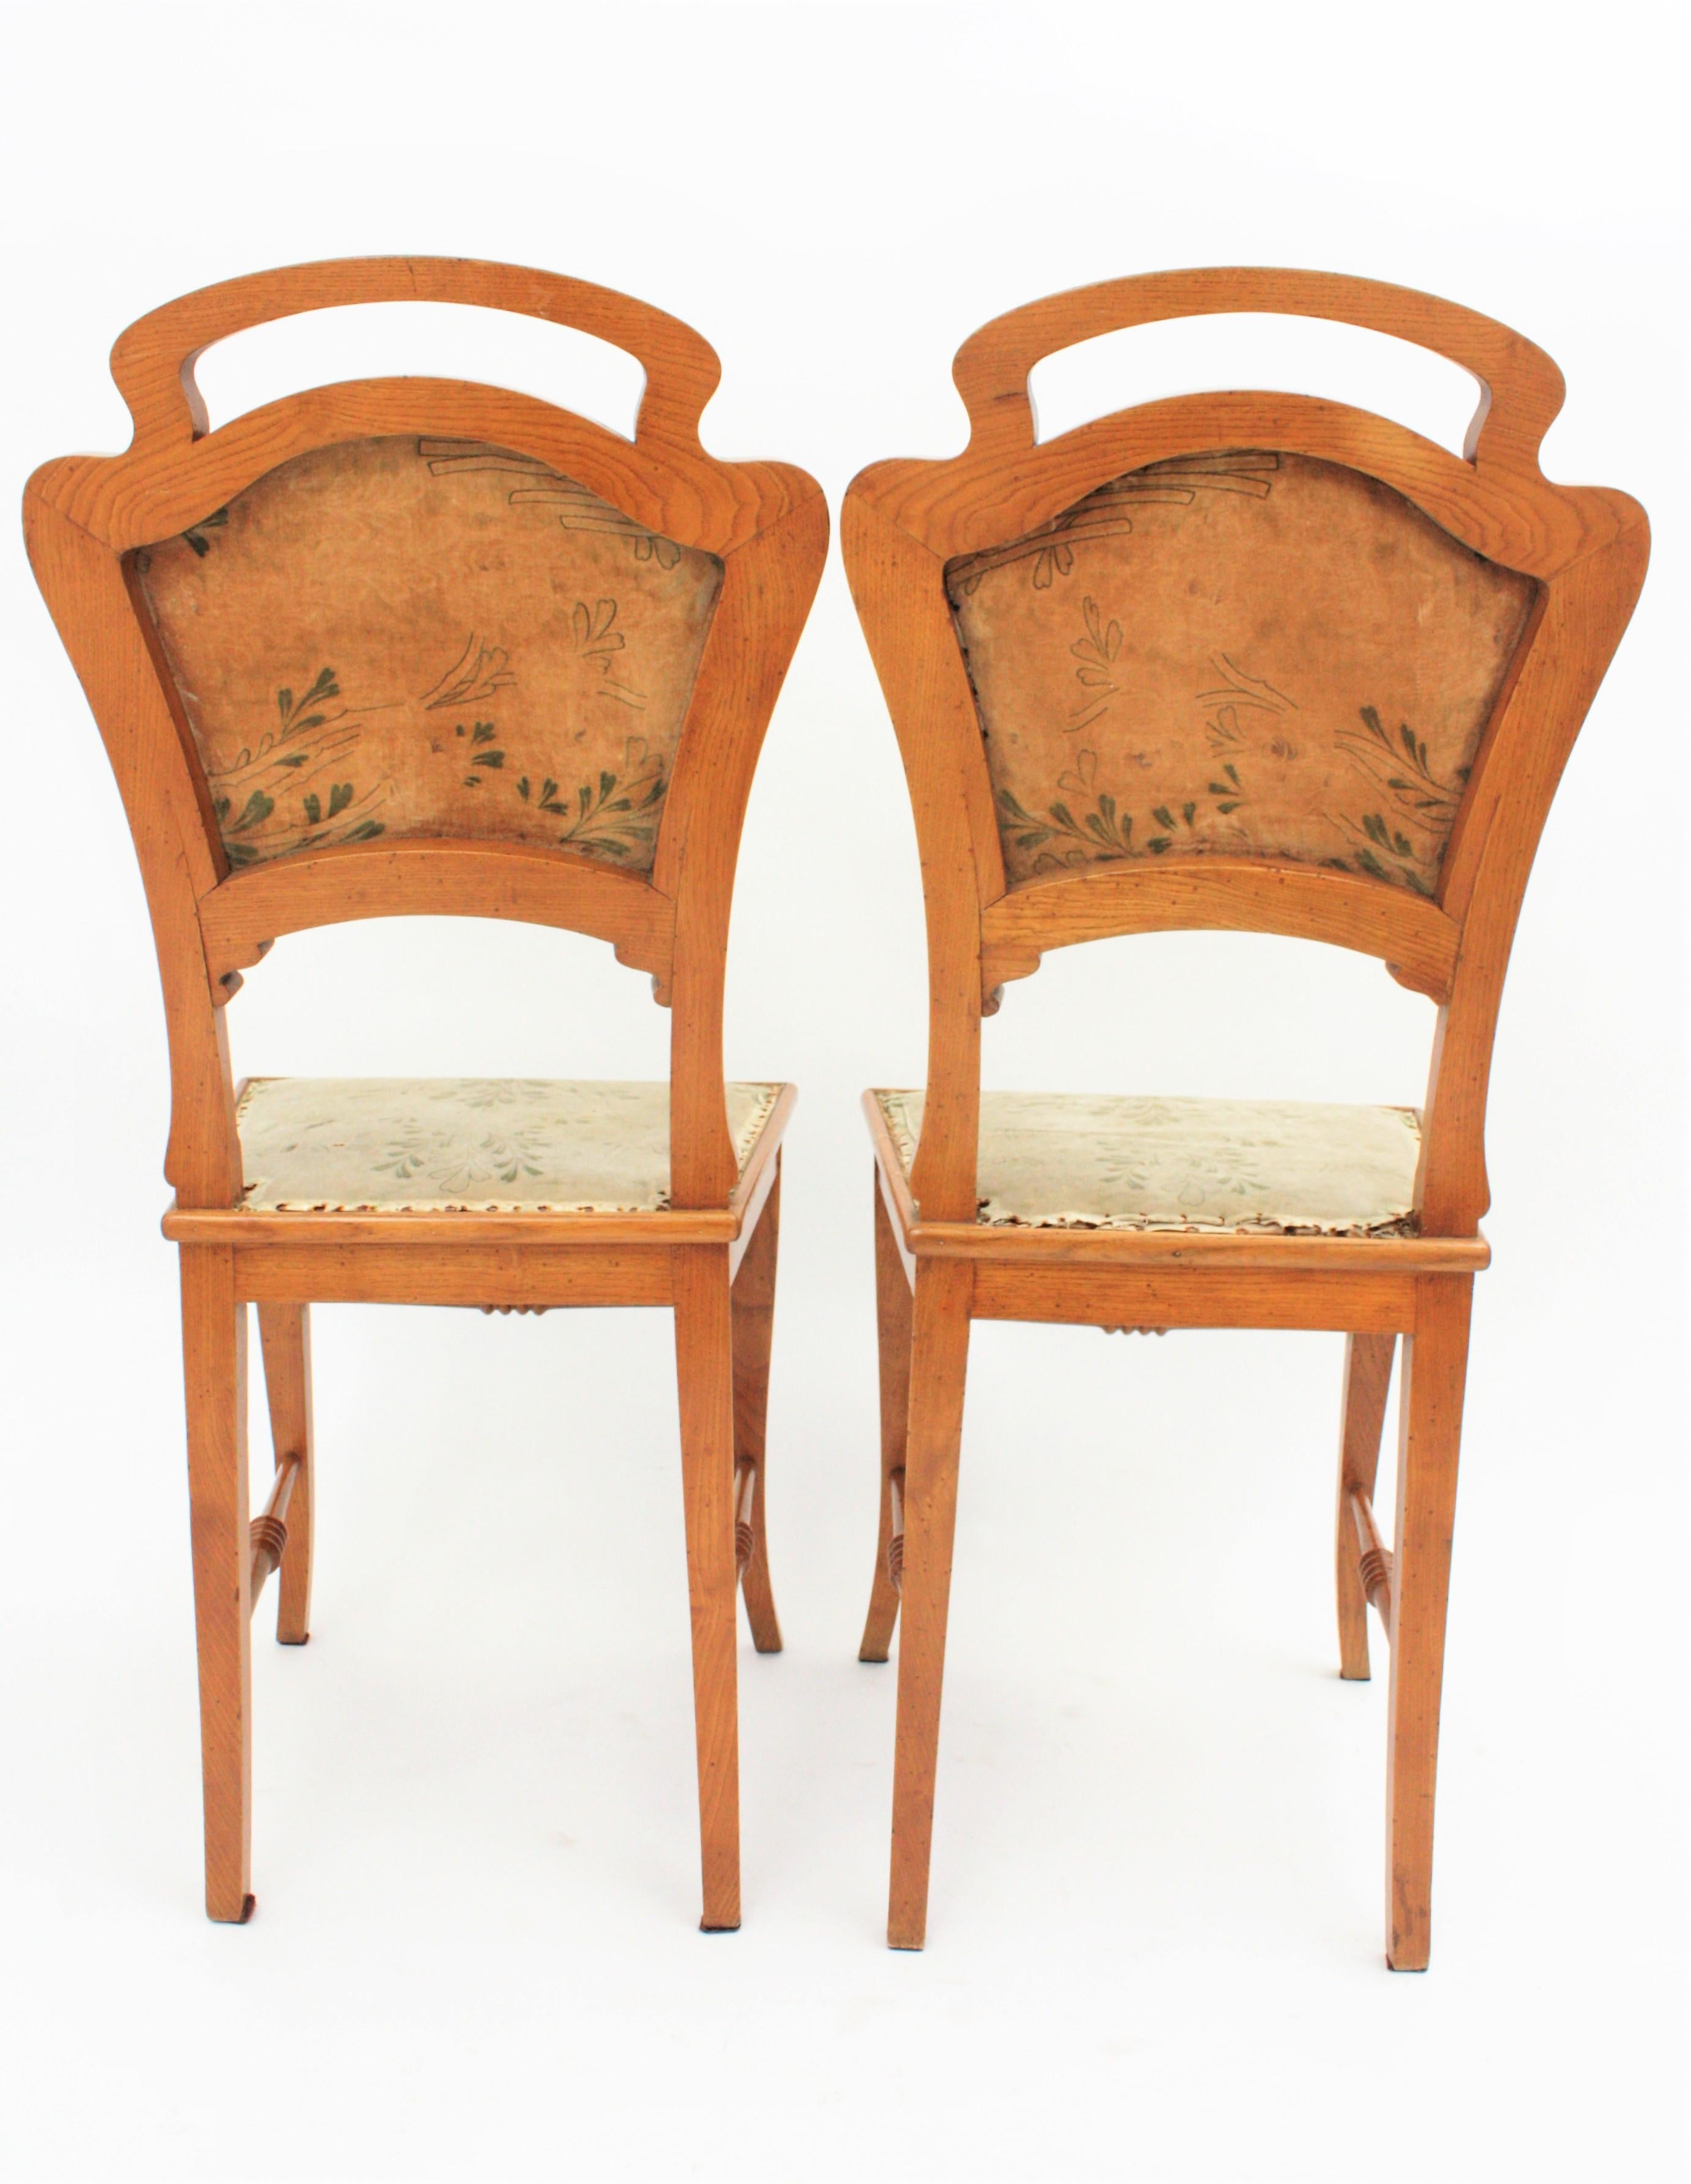 Spanish Art Nouveau Antoni Gaudi Style Pair of Carved Ashwood Side Chairs For Sale 2